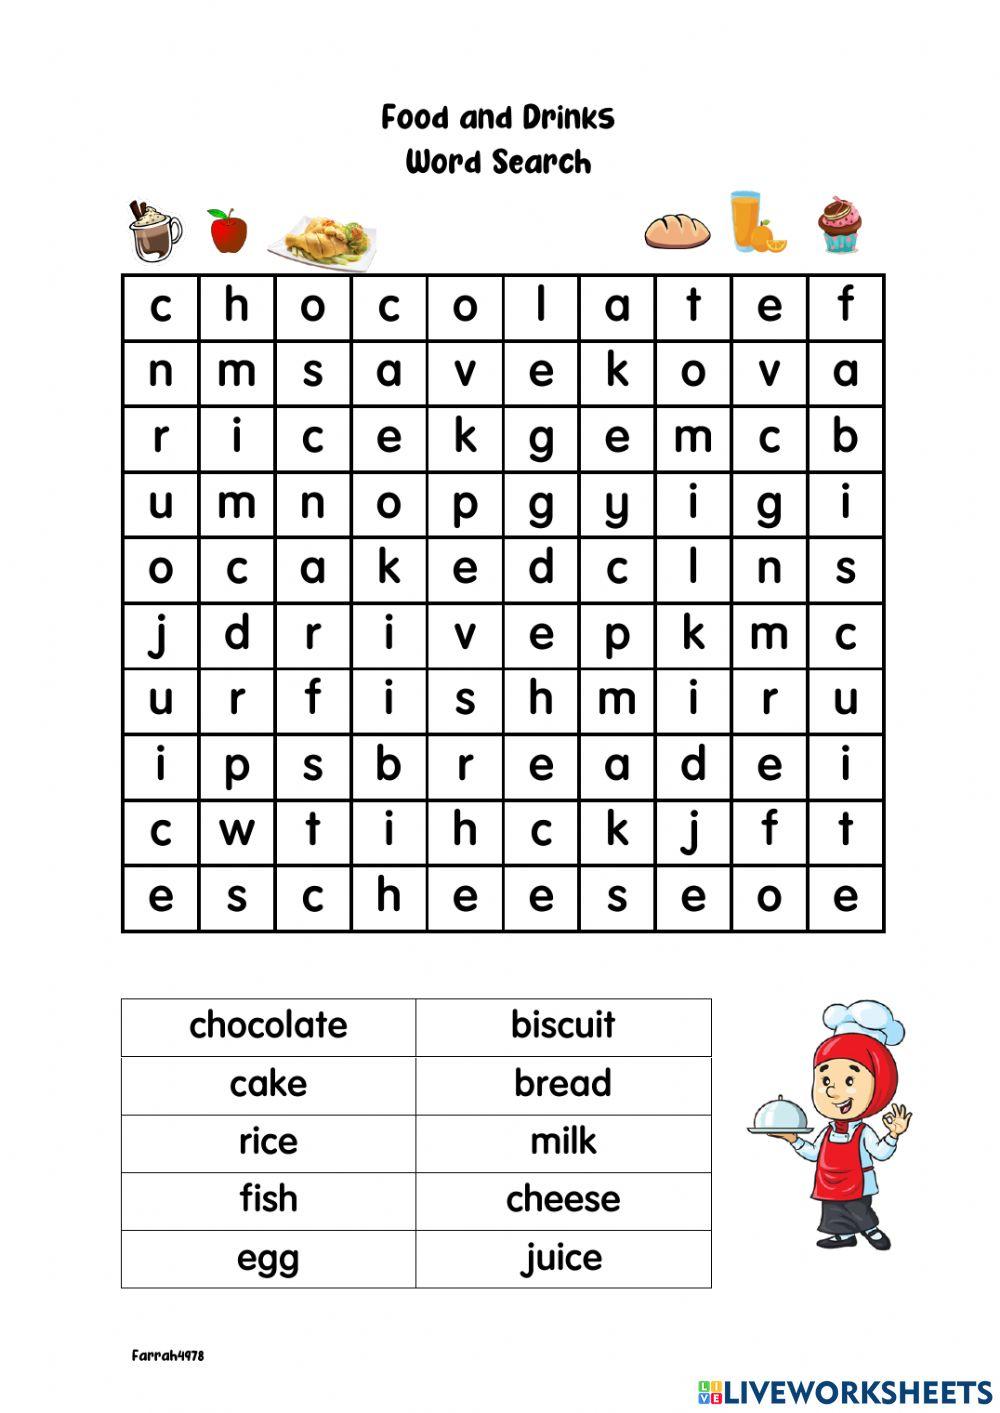 Food and drinks wordsearch